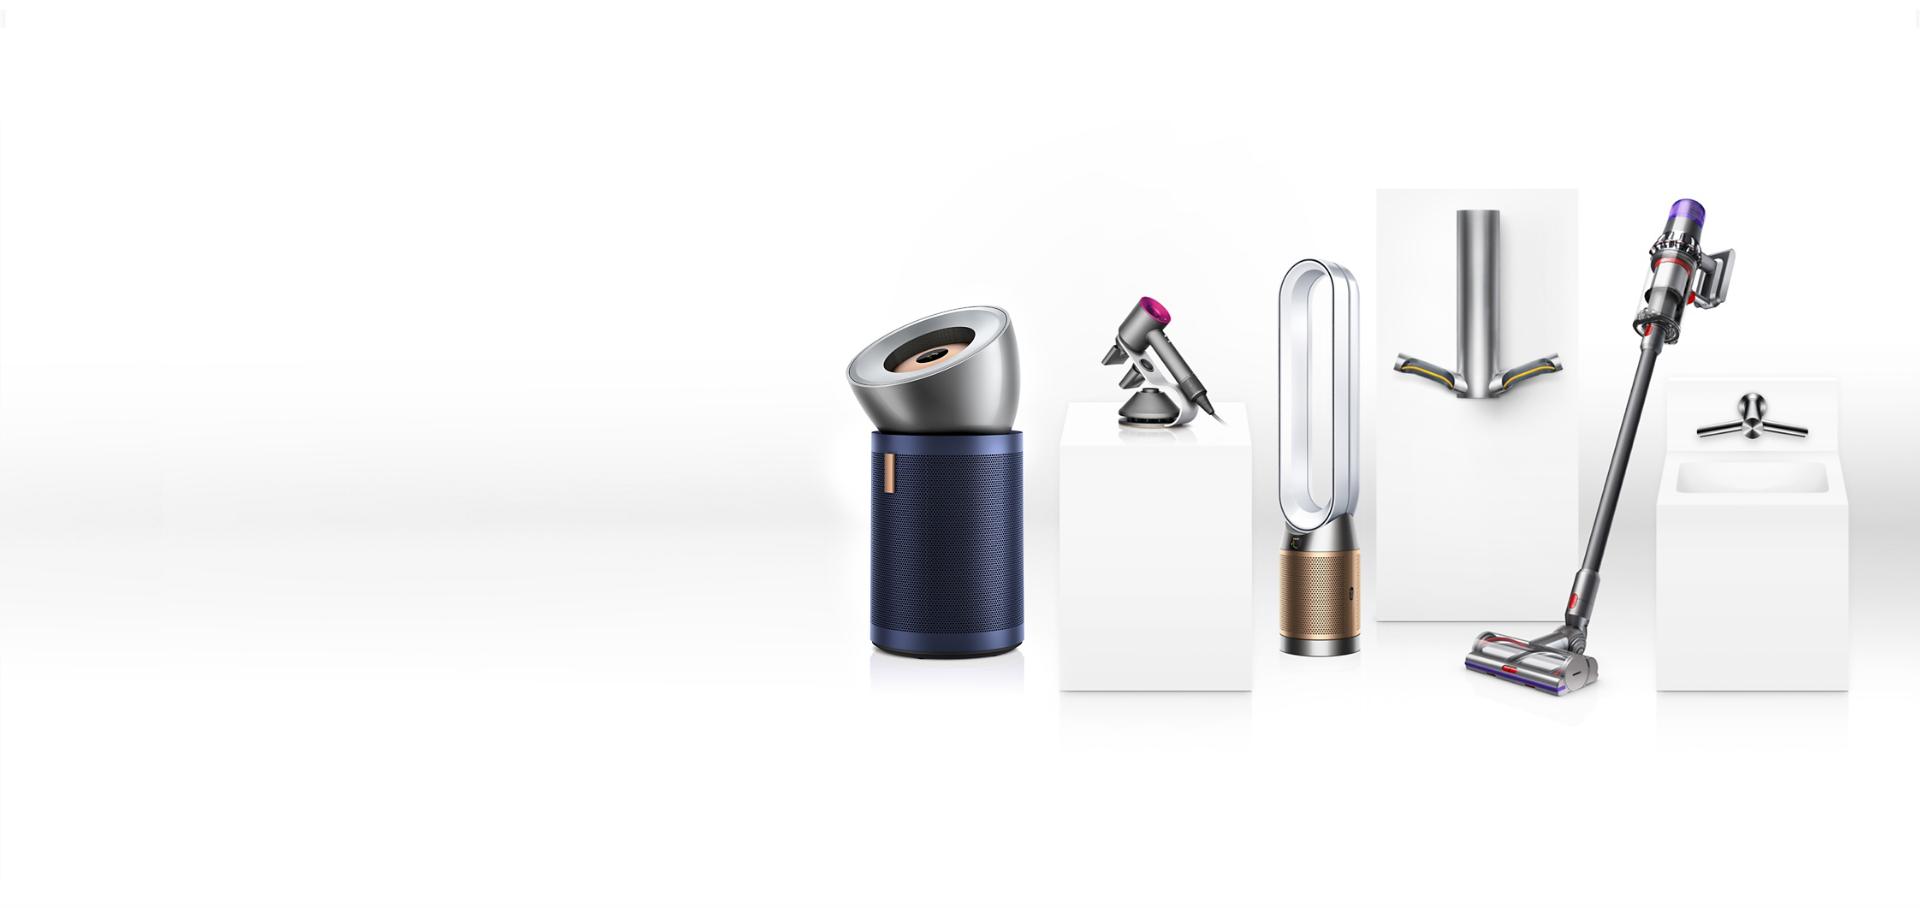 The range of Dyson business machines.